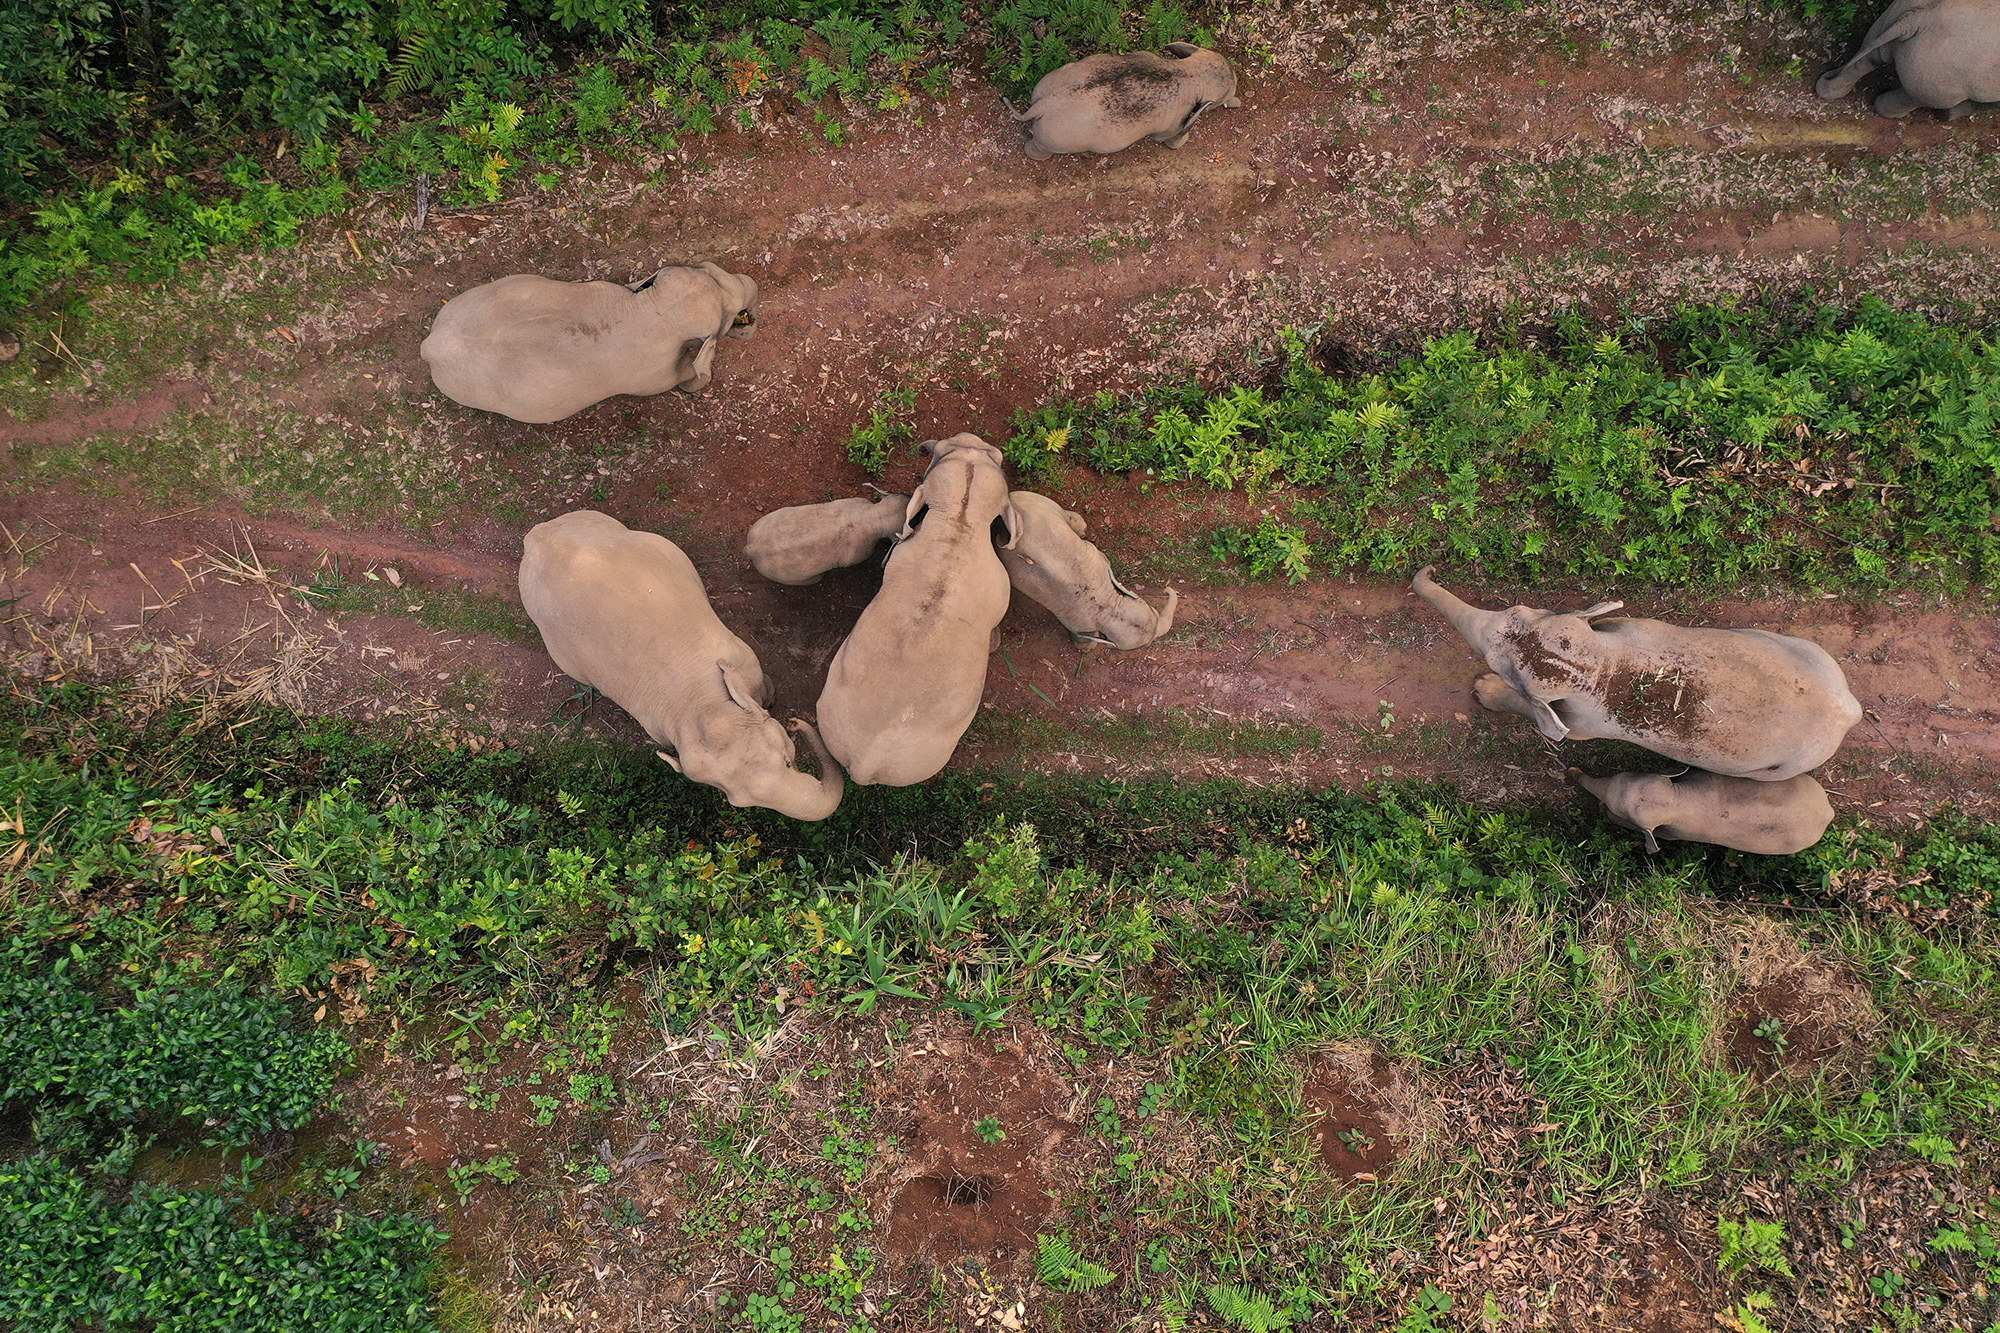 An overhead view of elephants standing around a fork in a dirt road